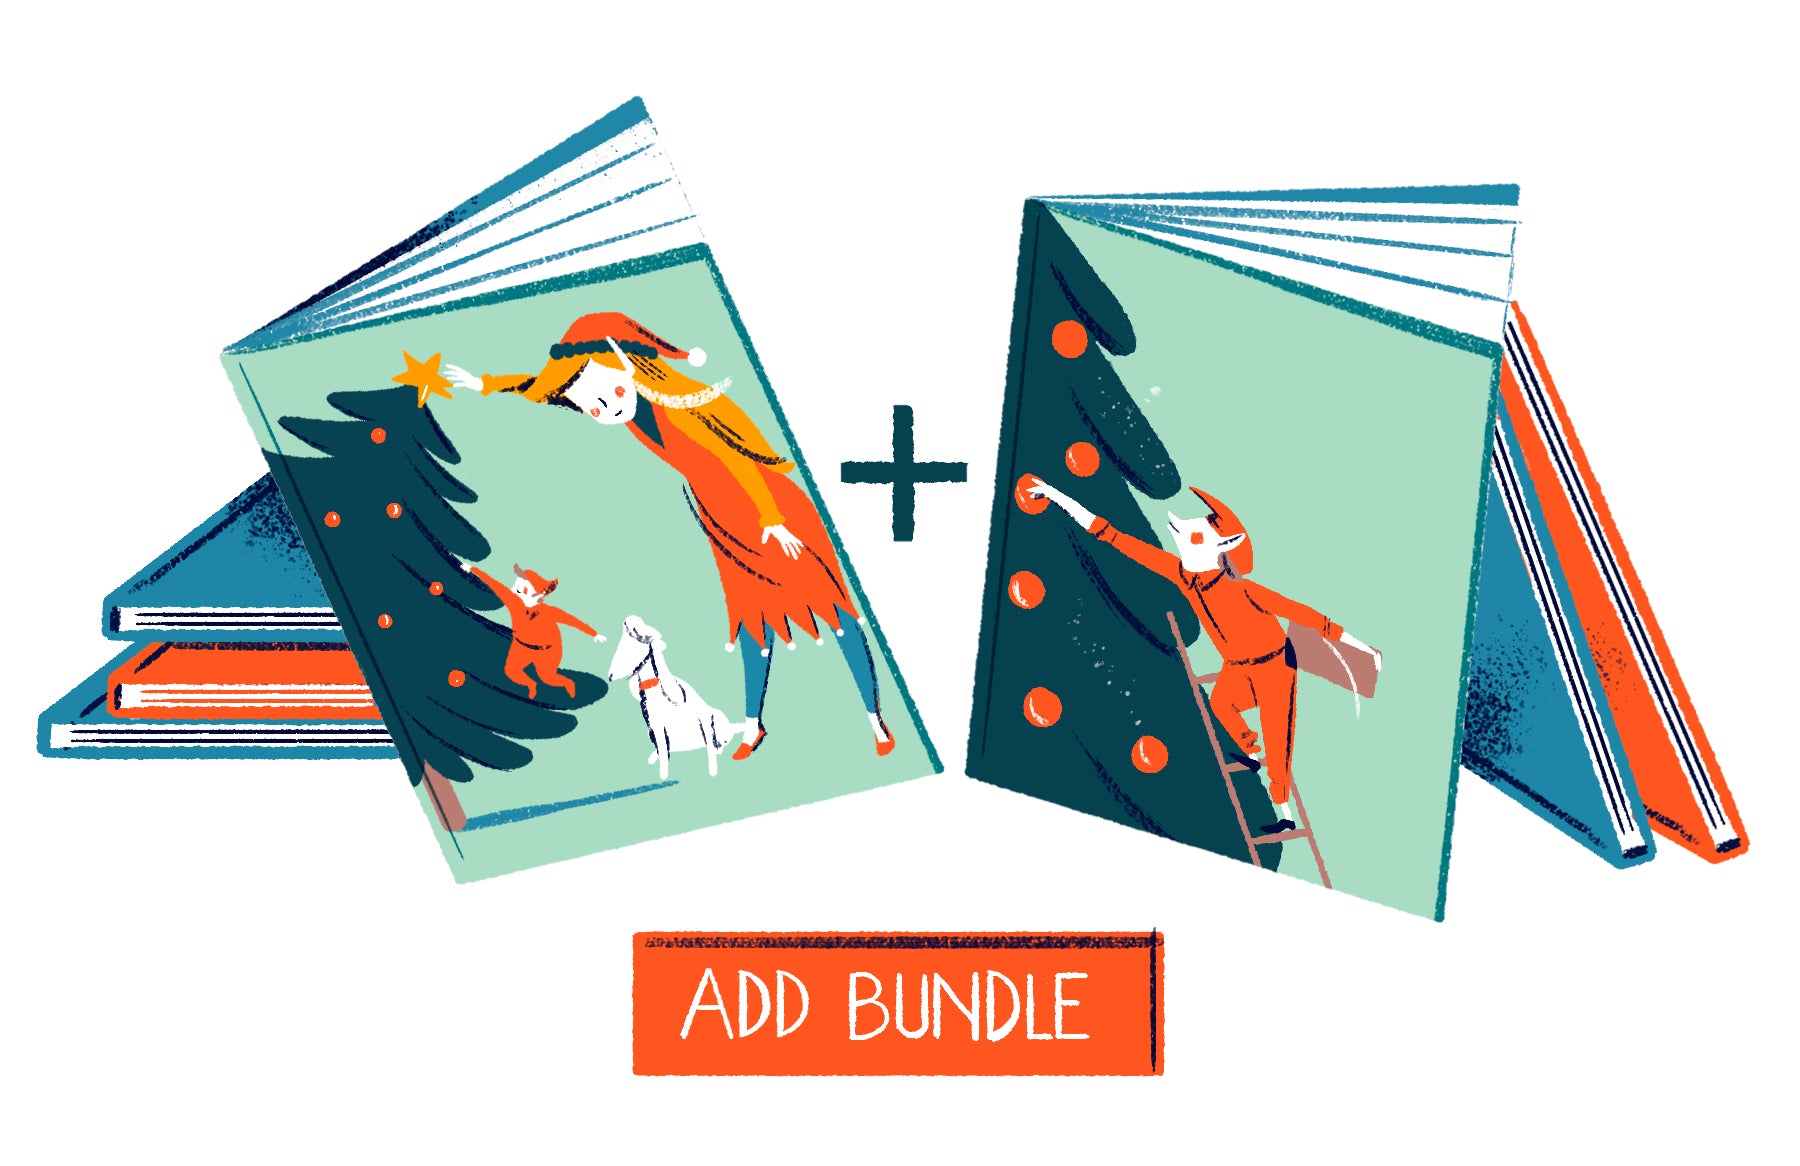 Illustration of two Christmas-themed books with a tag that reads "Add Bundle"